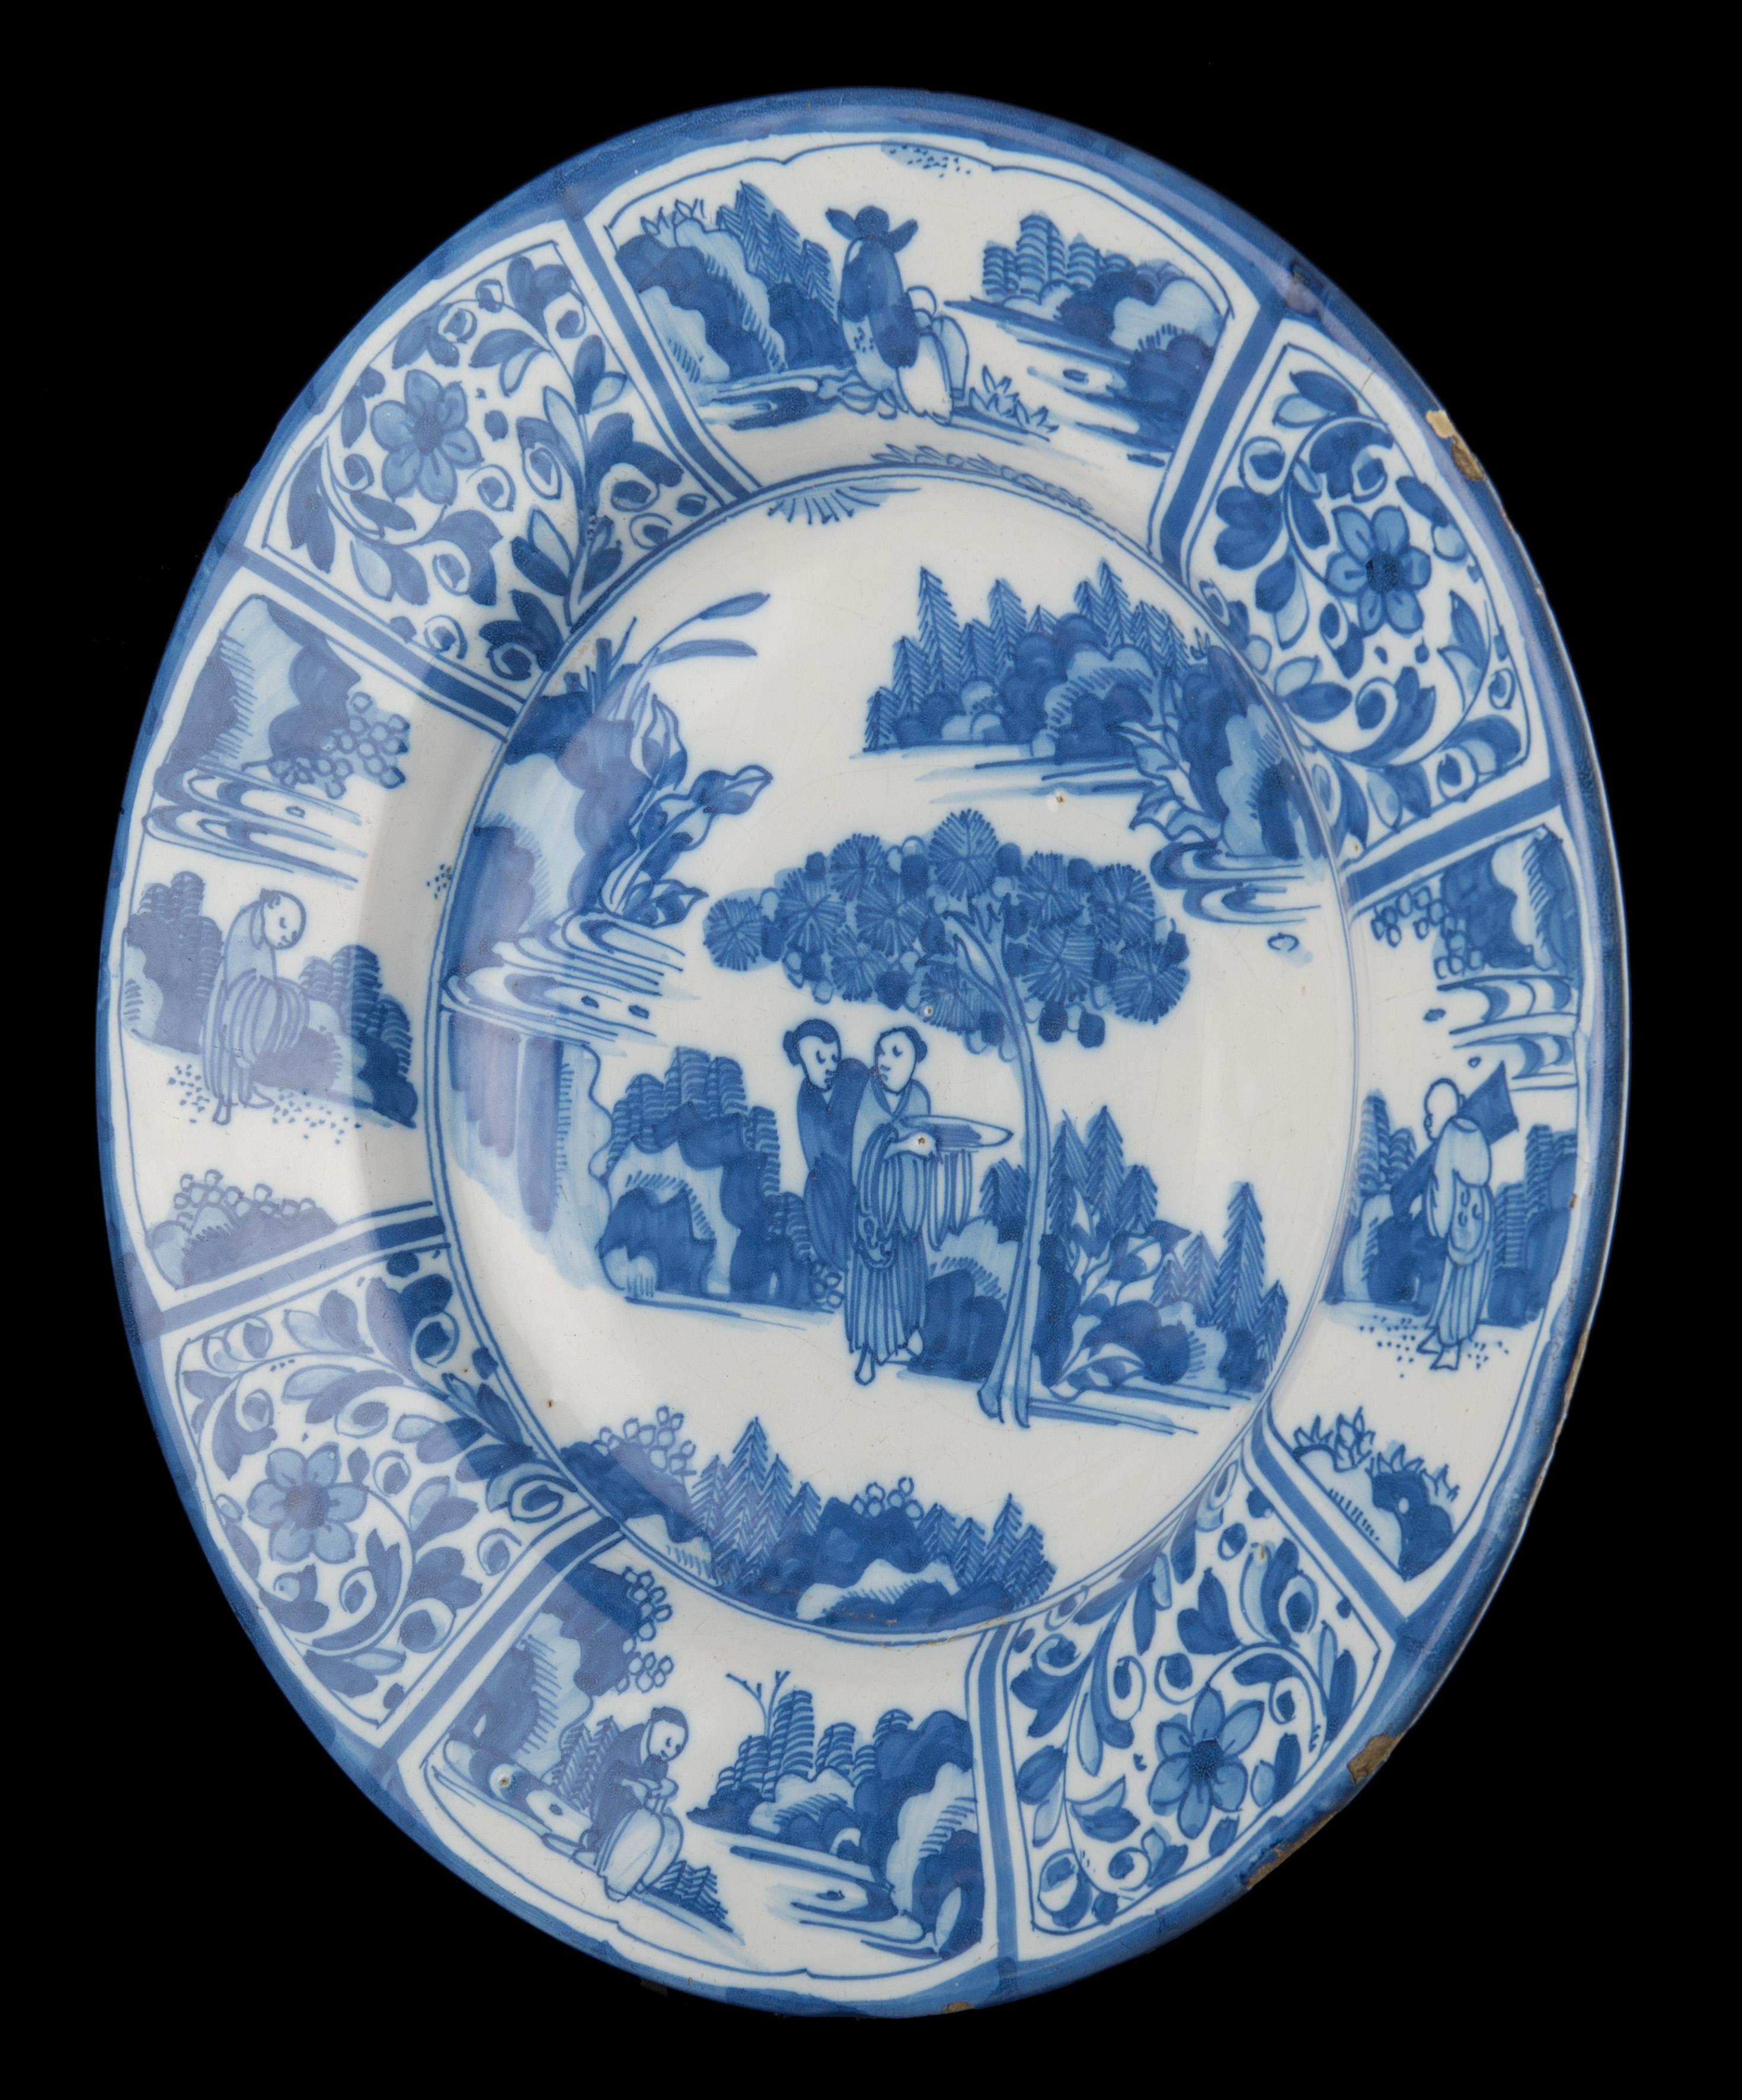 Blue and white chinoiserie dish. Delft, circa 1670 

Blue and white dish with a wide-spreading flange, the center painted with two conversing Chinese under a tree in an oriental landscape. One man carries a dish. The eight-panelled border is